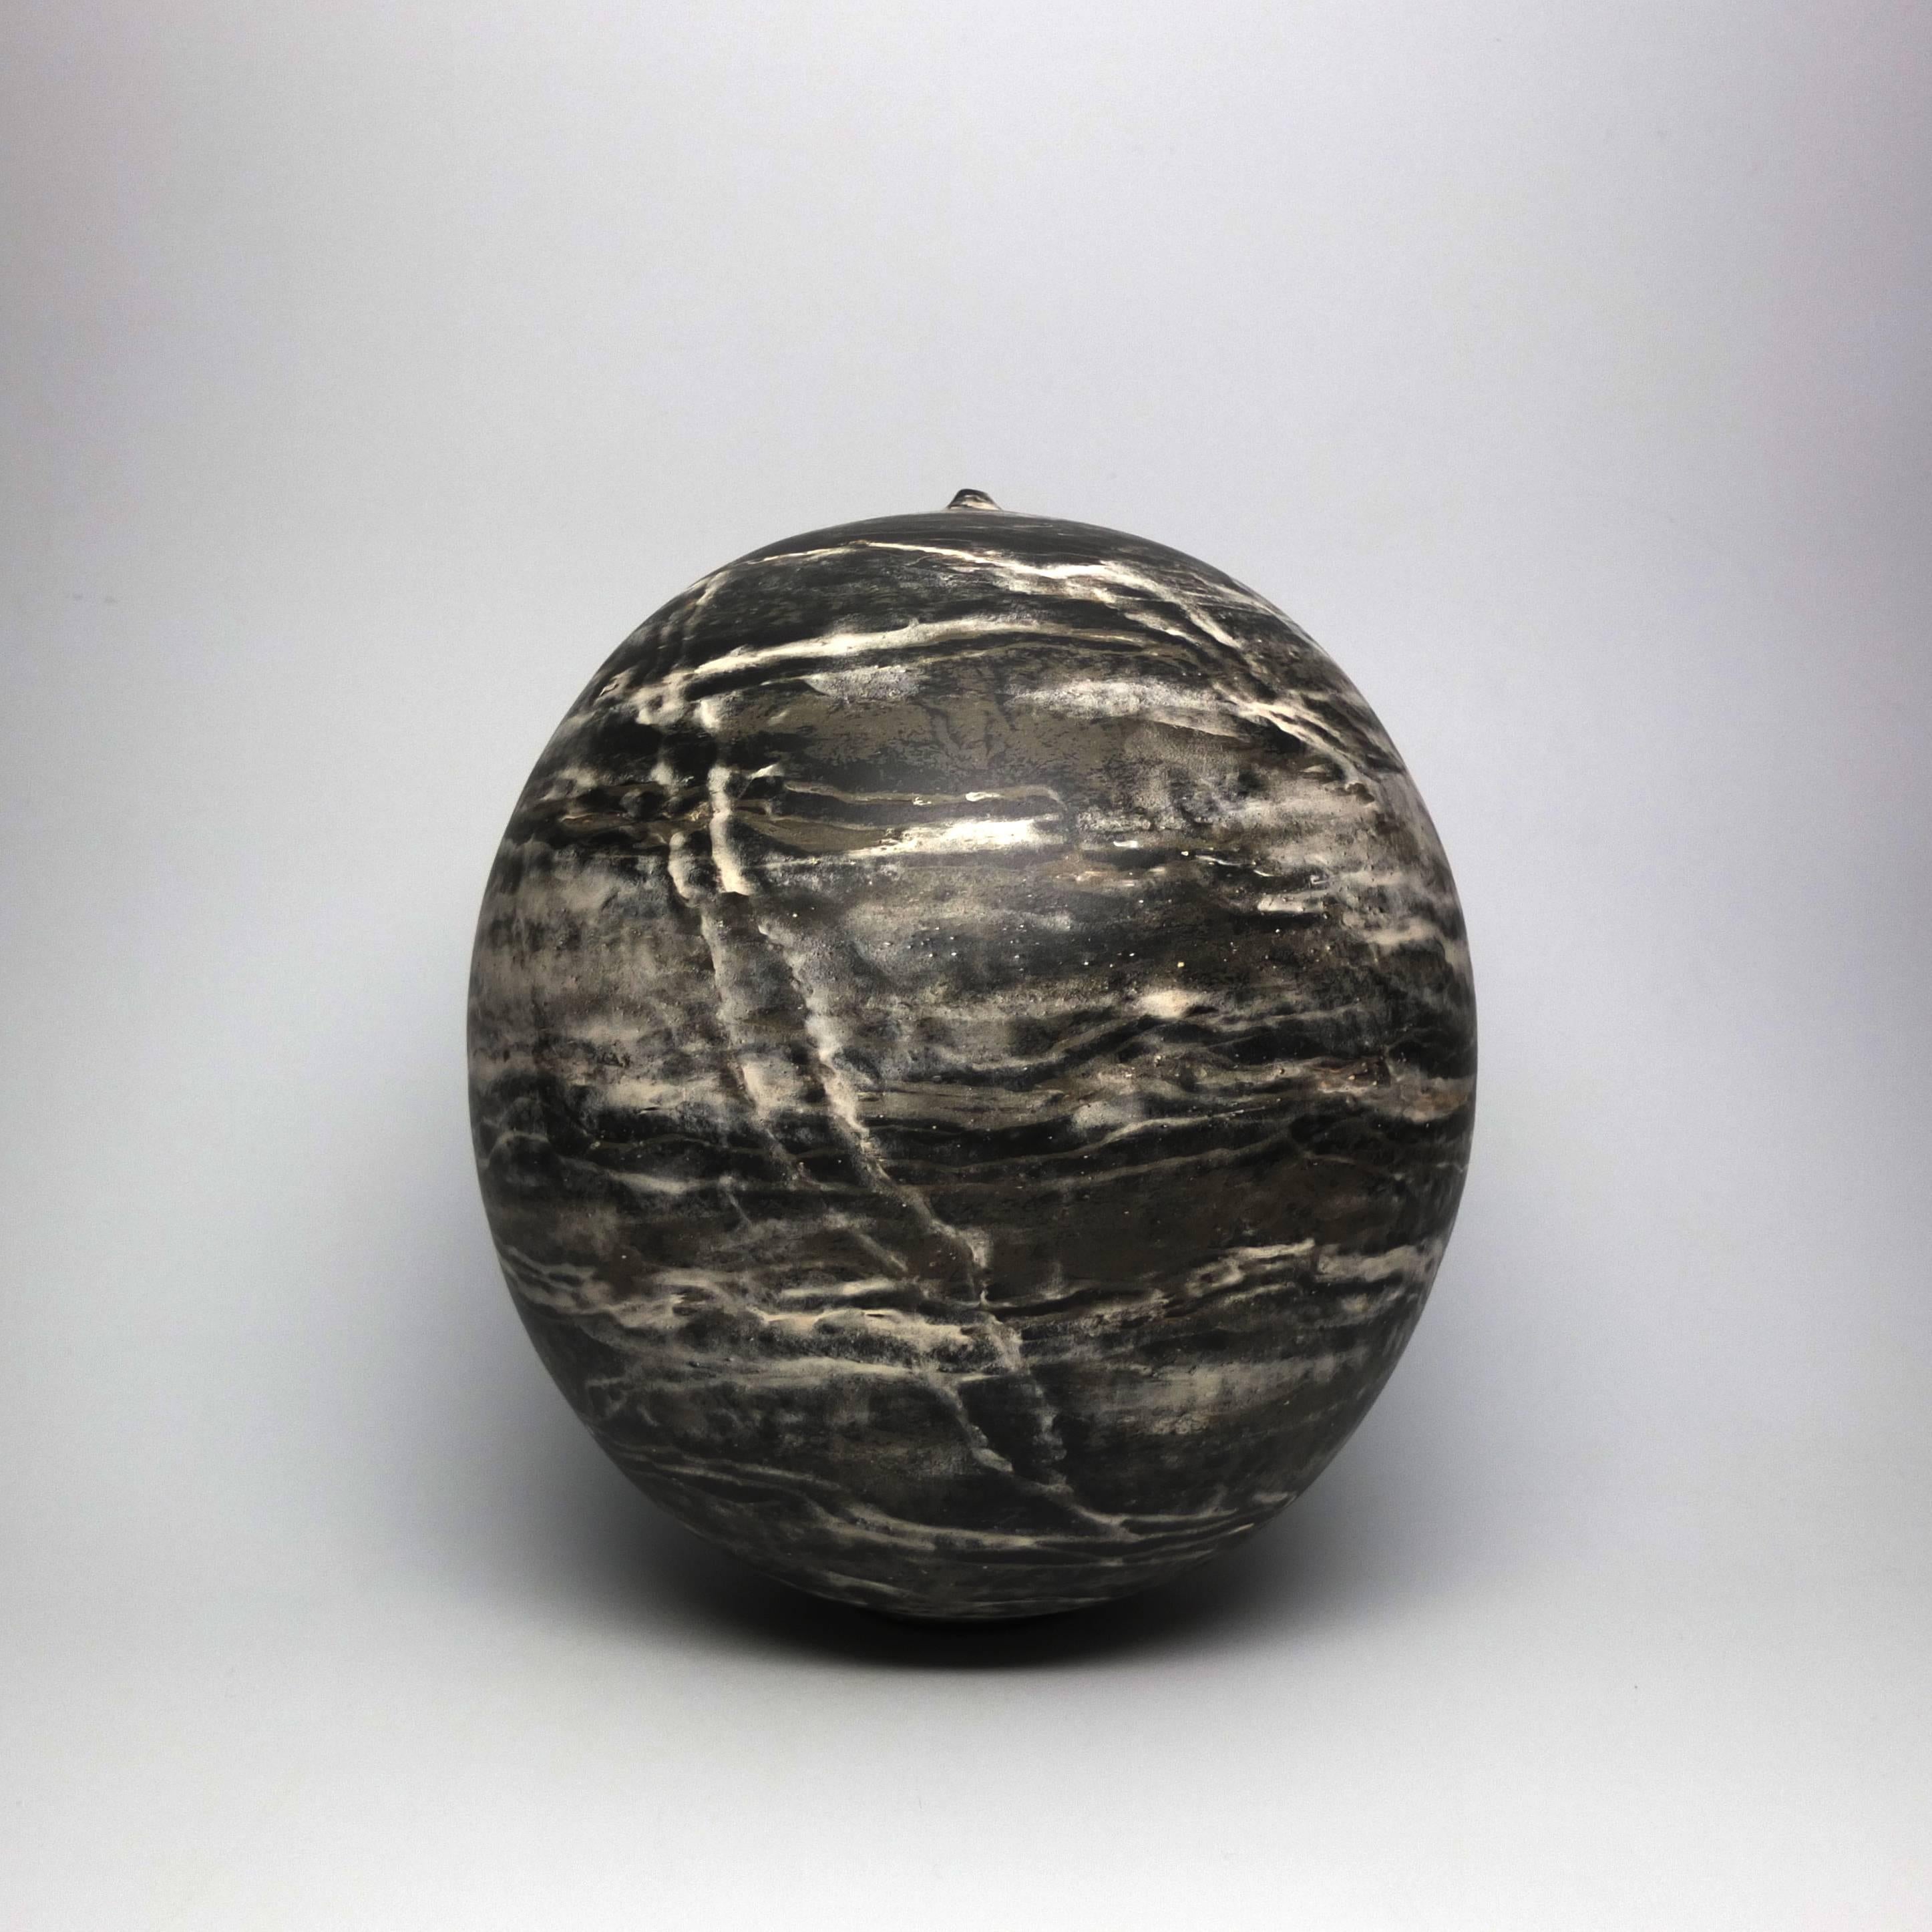 Artist bio:
New York based artist, Jeffrey Loura, creates organic, elemental vessels. Jeffrey moved to New York in 1996 to earn his BFA at Parsons School of Design, where he studied Illustration. He began throwing ceramics five years later in 2001.